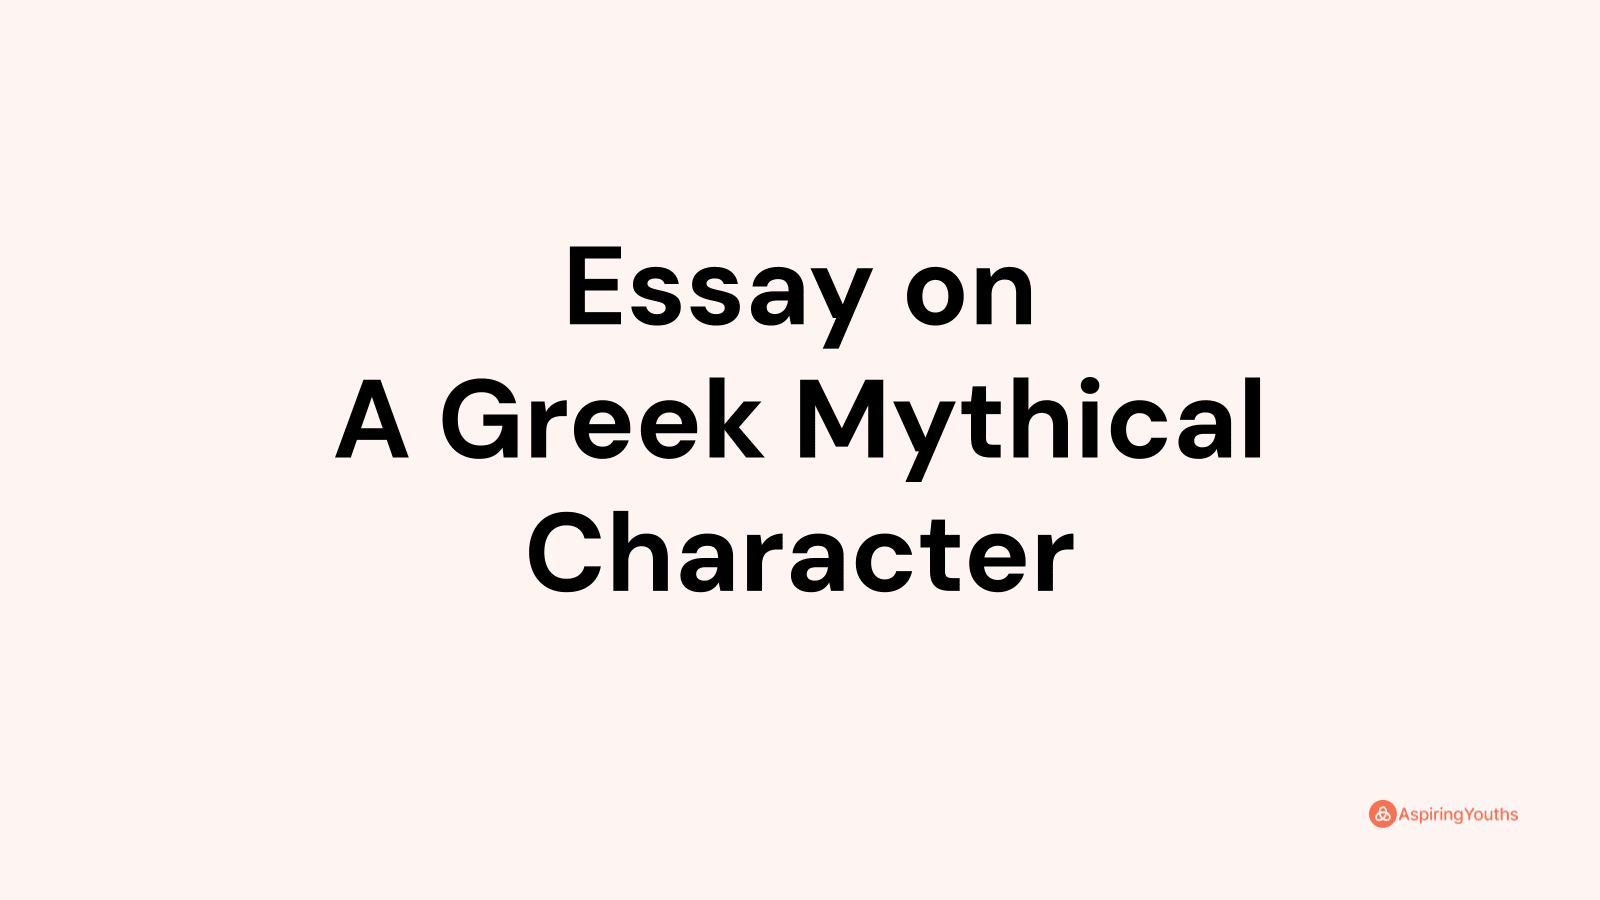 an informative essay on a greek mythical character